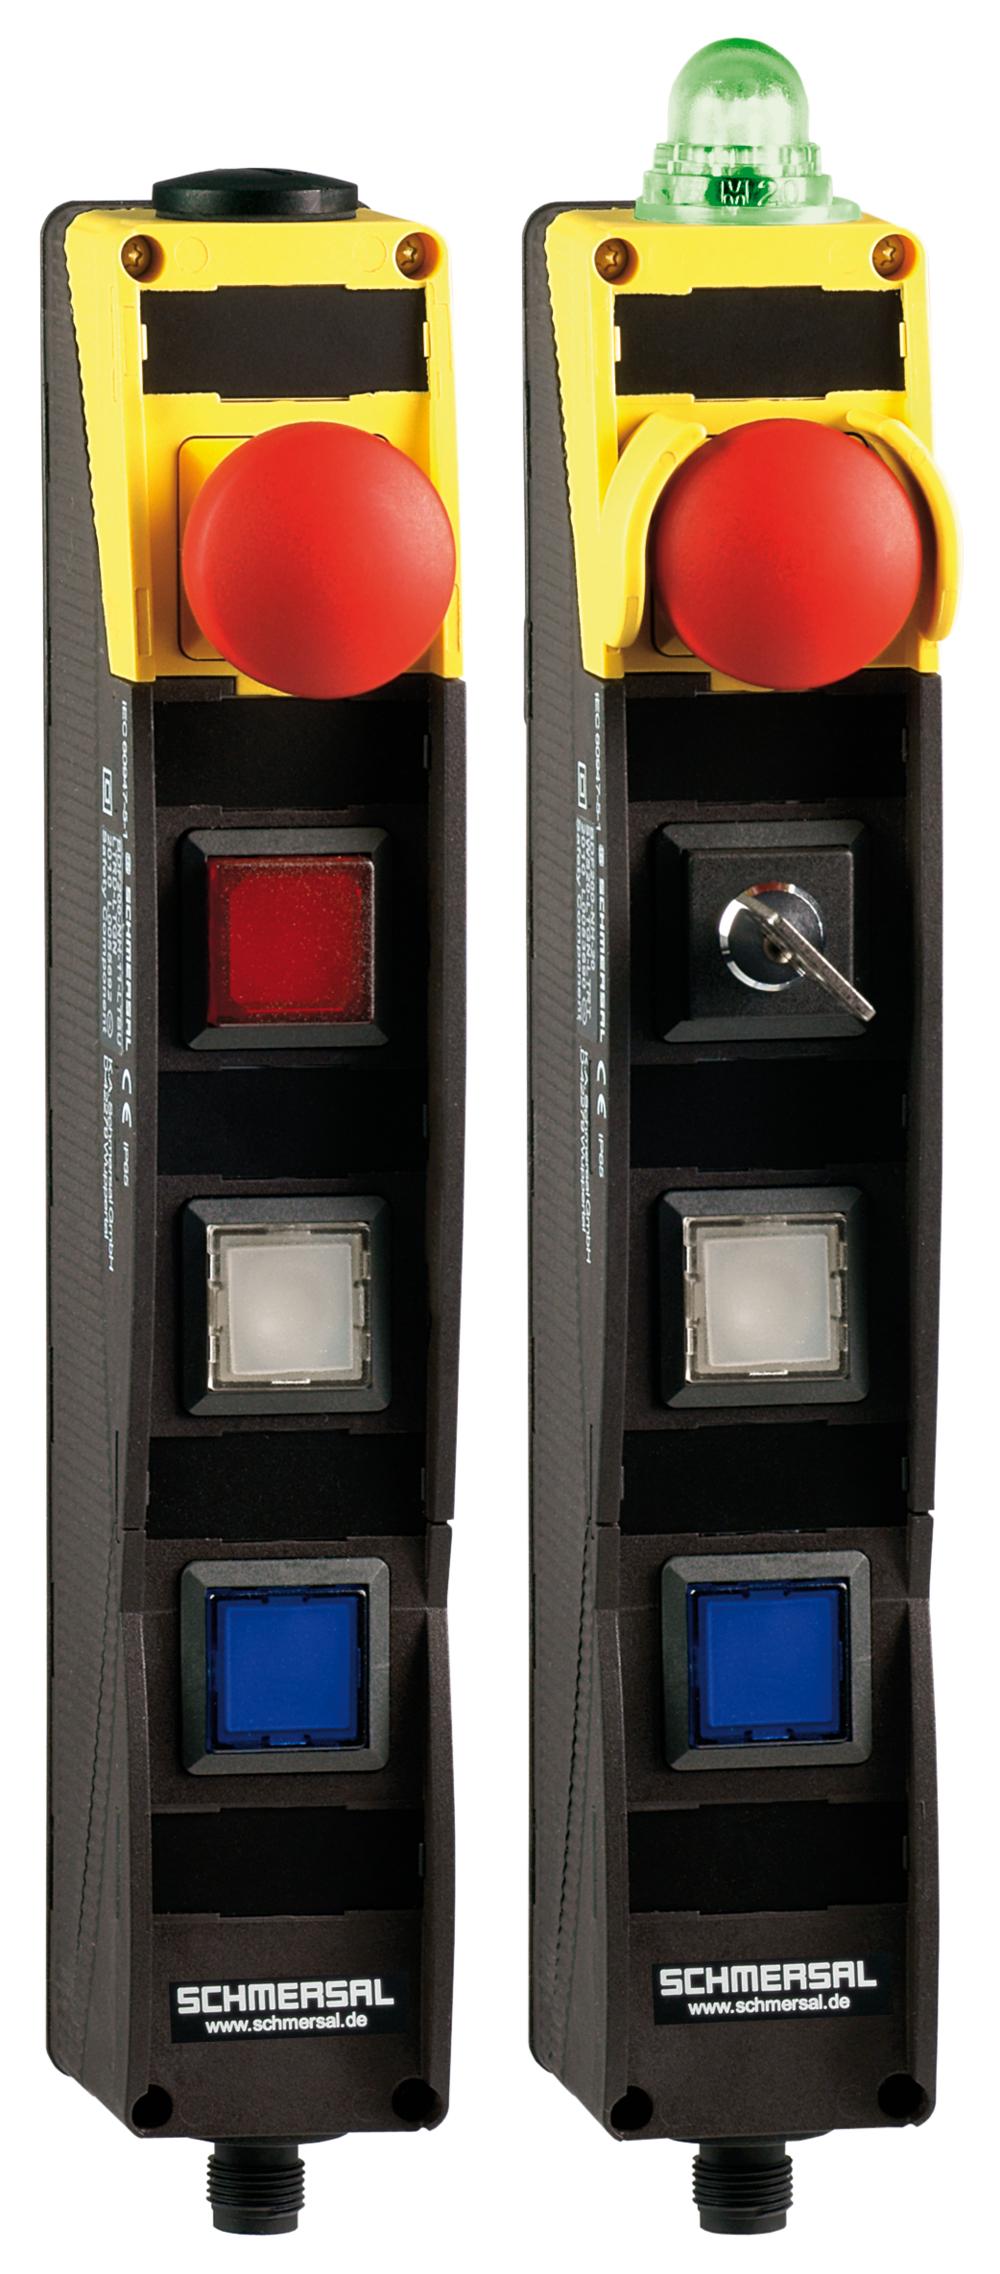 Schmersal BDF200-FB-B-B-LT-LT-2875 Control panels; integrated FB interface for connection to the Safety-Field-Box SFB; Pos 1: Blanking plug; Pos 2: Blanking plug; Pos 3: illuminated pushbutton 2875 with changeable colors; Pos 4: illuminated pushbutton 2875 with changeable colors; slender s